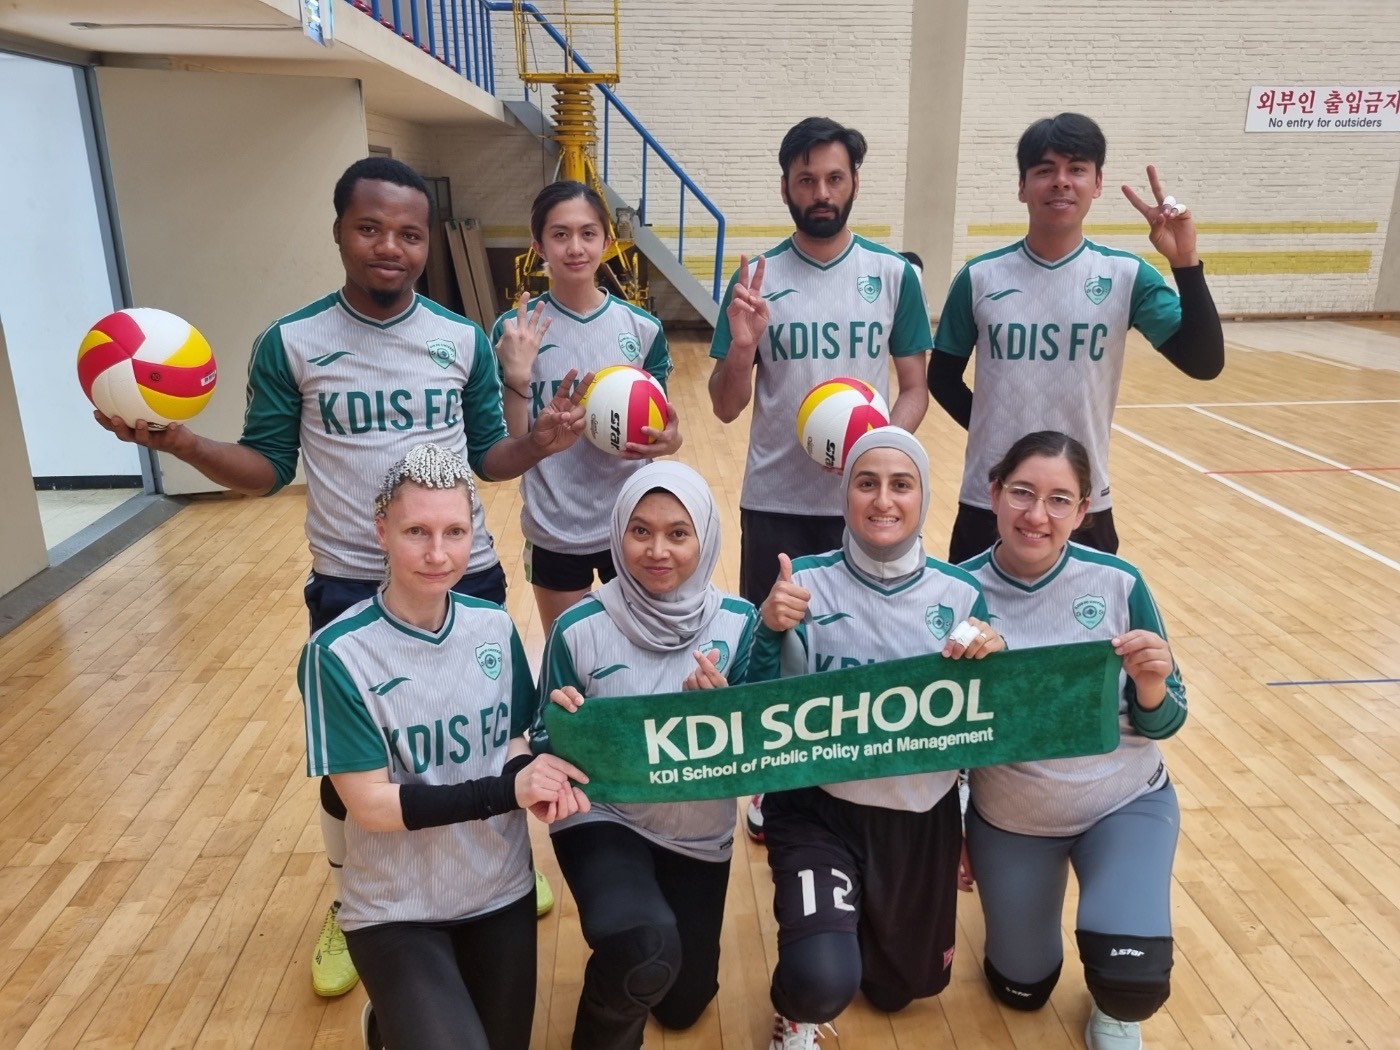 KDI School Tigers Volleyball Club Emerge as Winners at the Daejeon Annual Invitational Volleyball Competition